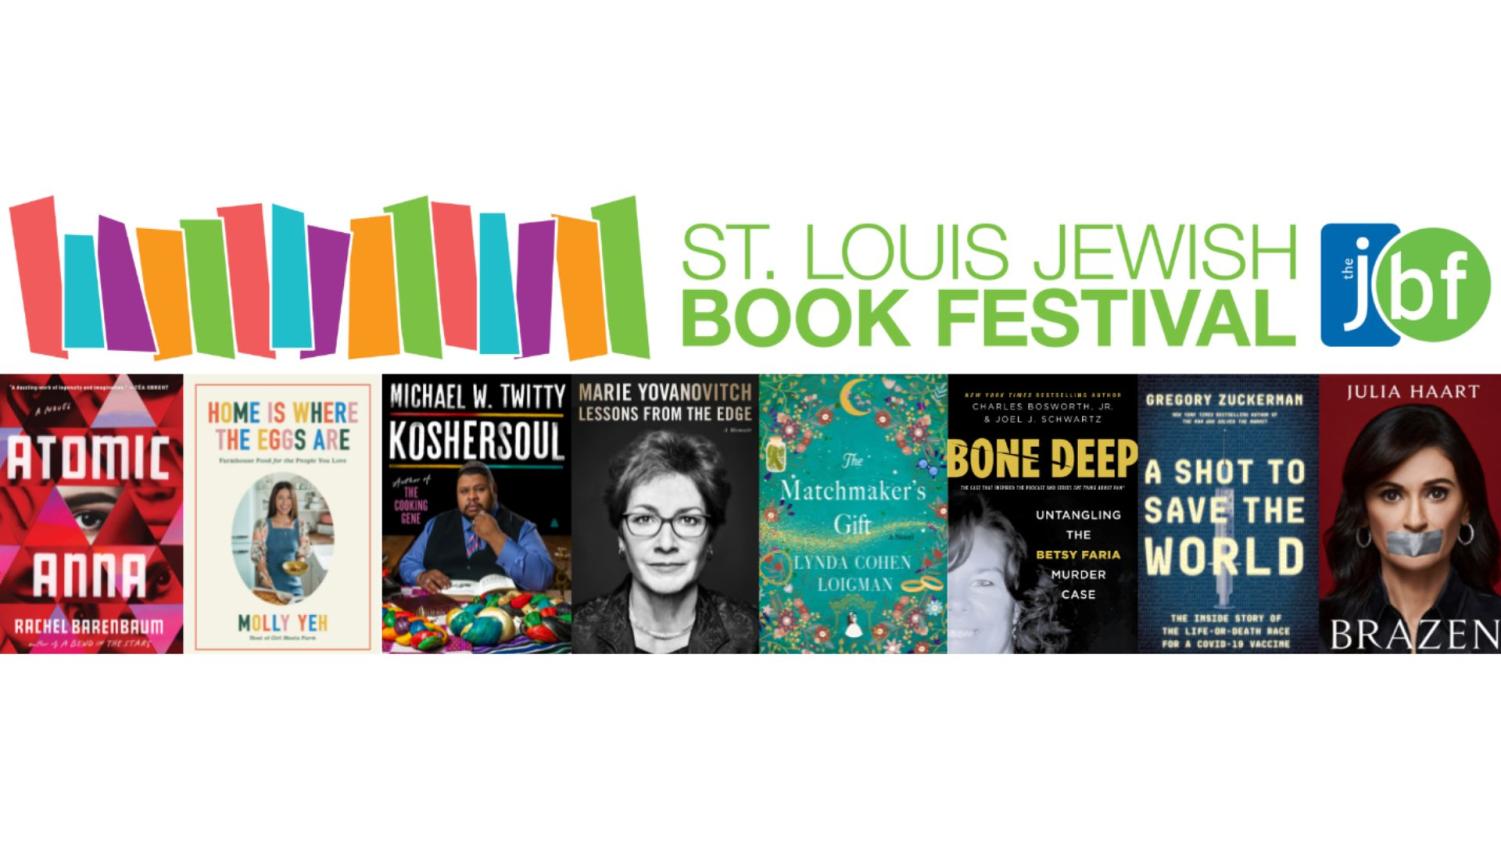 Here's the full author lineup for 44th Annual St. Louis Jewish Book